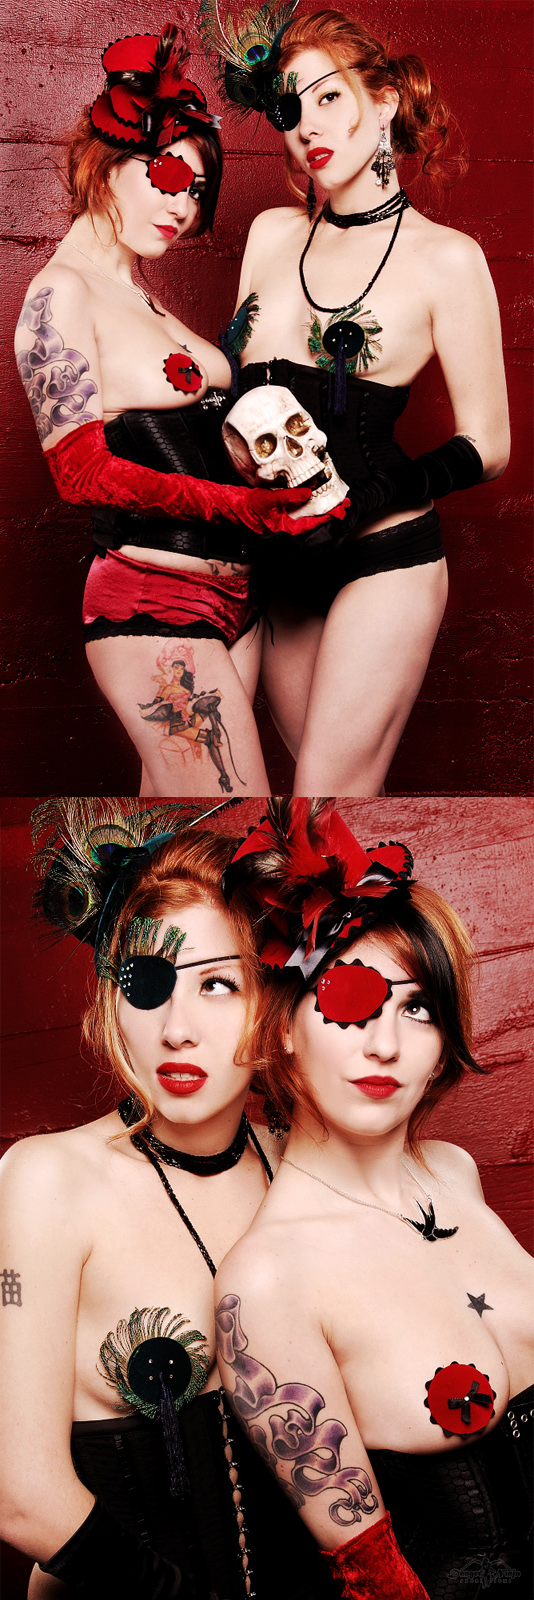 Female model photo shoot of Apples Mini-Top Hats and Miss Scarlett Storm by Danger Ninja in Portland, Or., clothing designed by Apples Mini-Top Hats